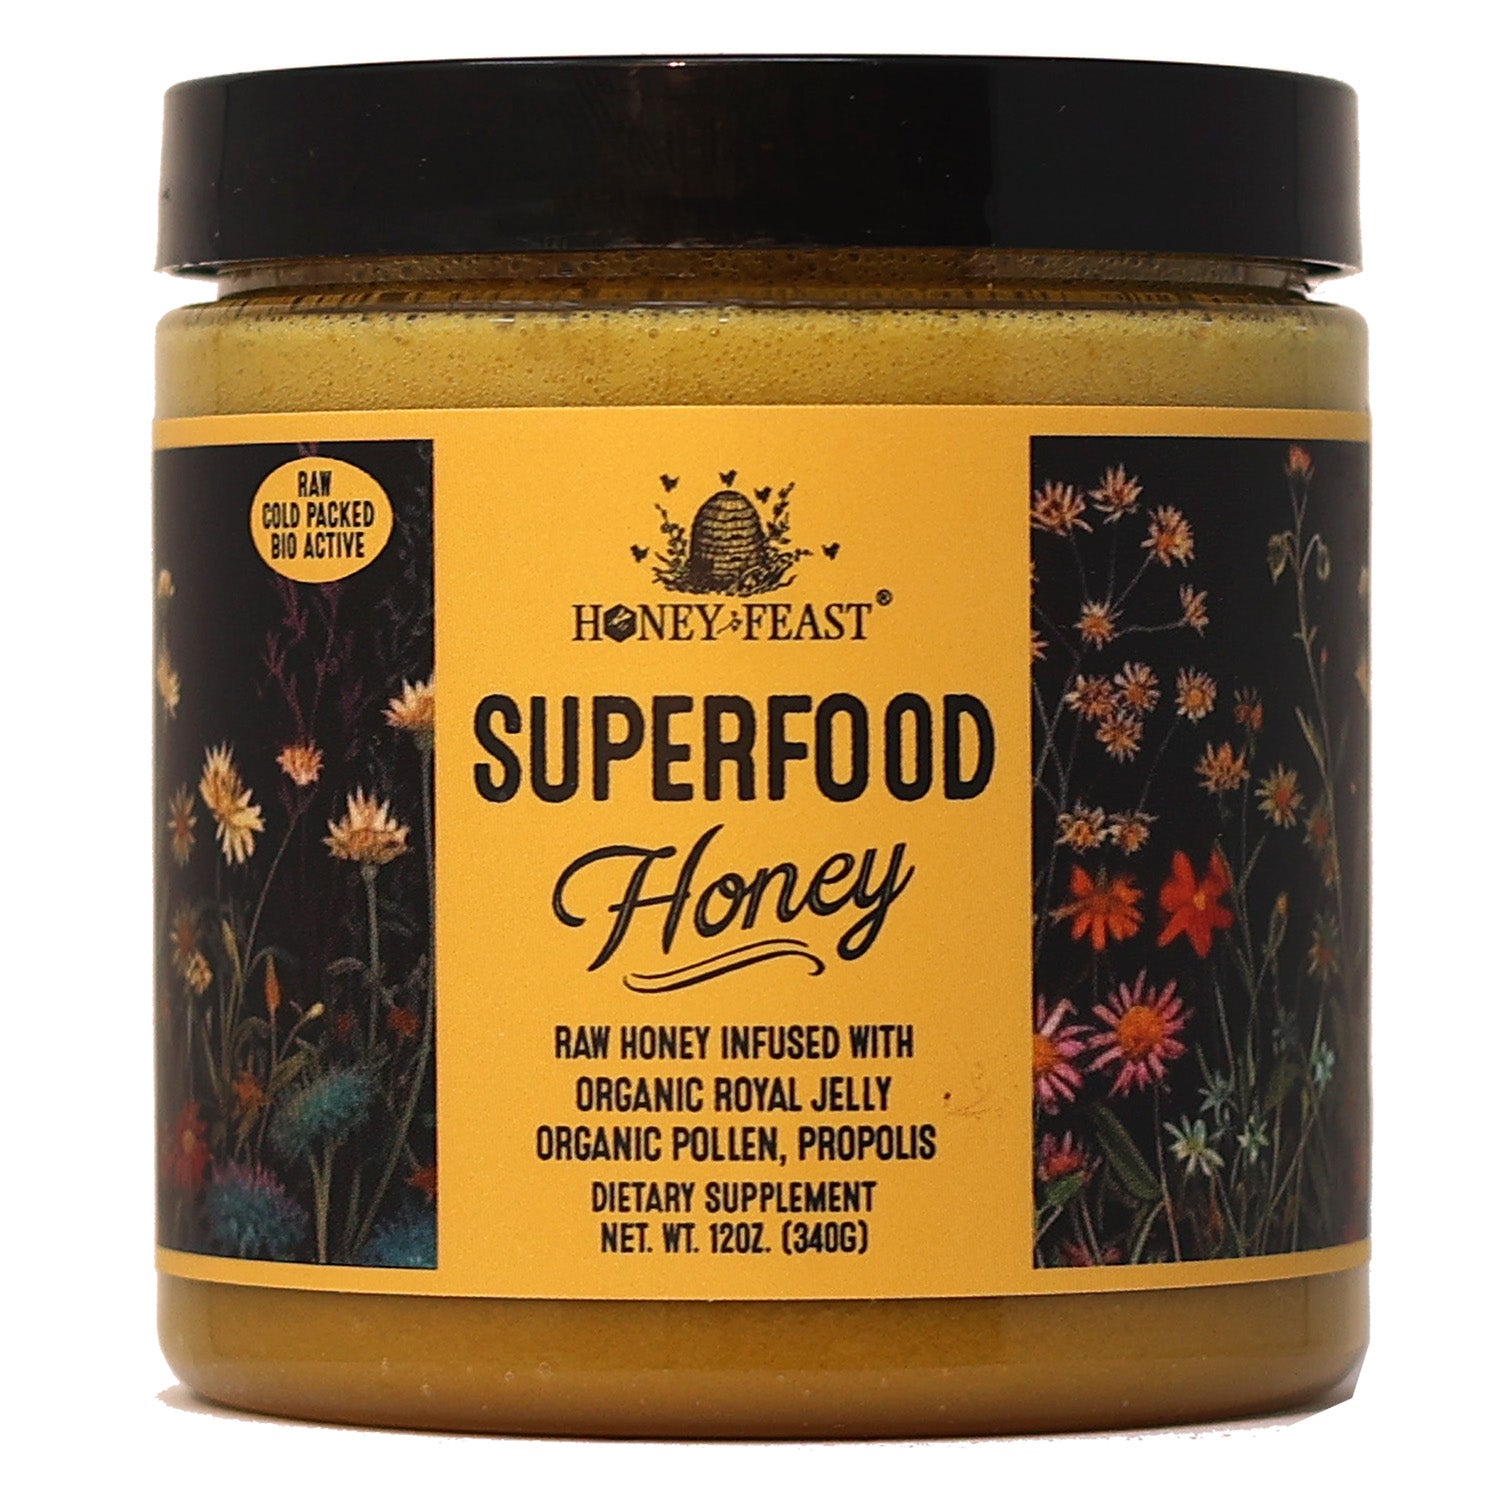 Beekeeper's Naturals B. Powered Superfood with Honey Propolis, Royal Jelly,  & Bee Pollen, 11.6 oz 